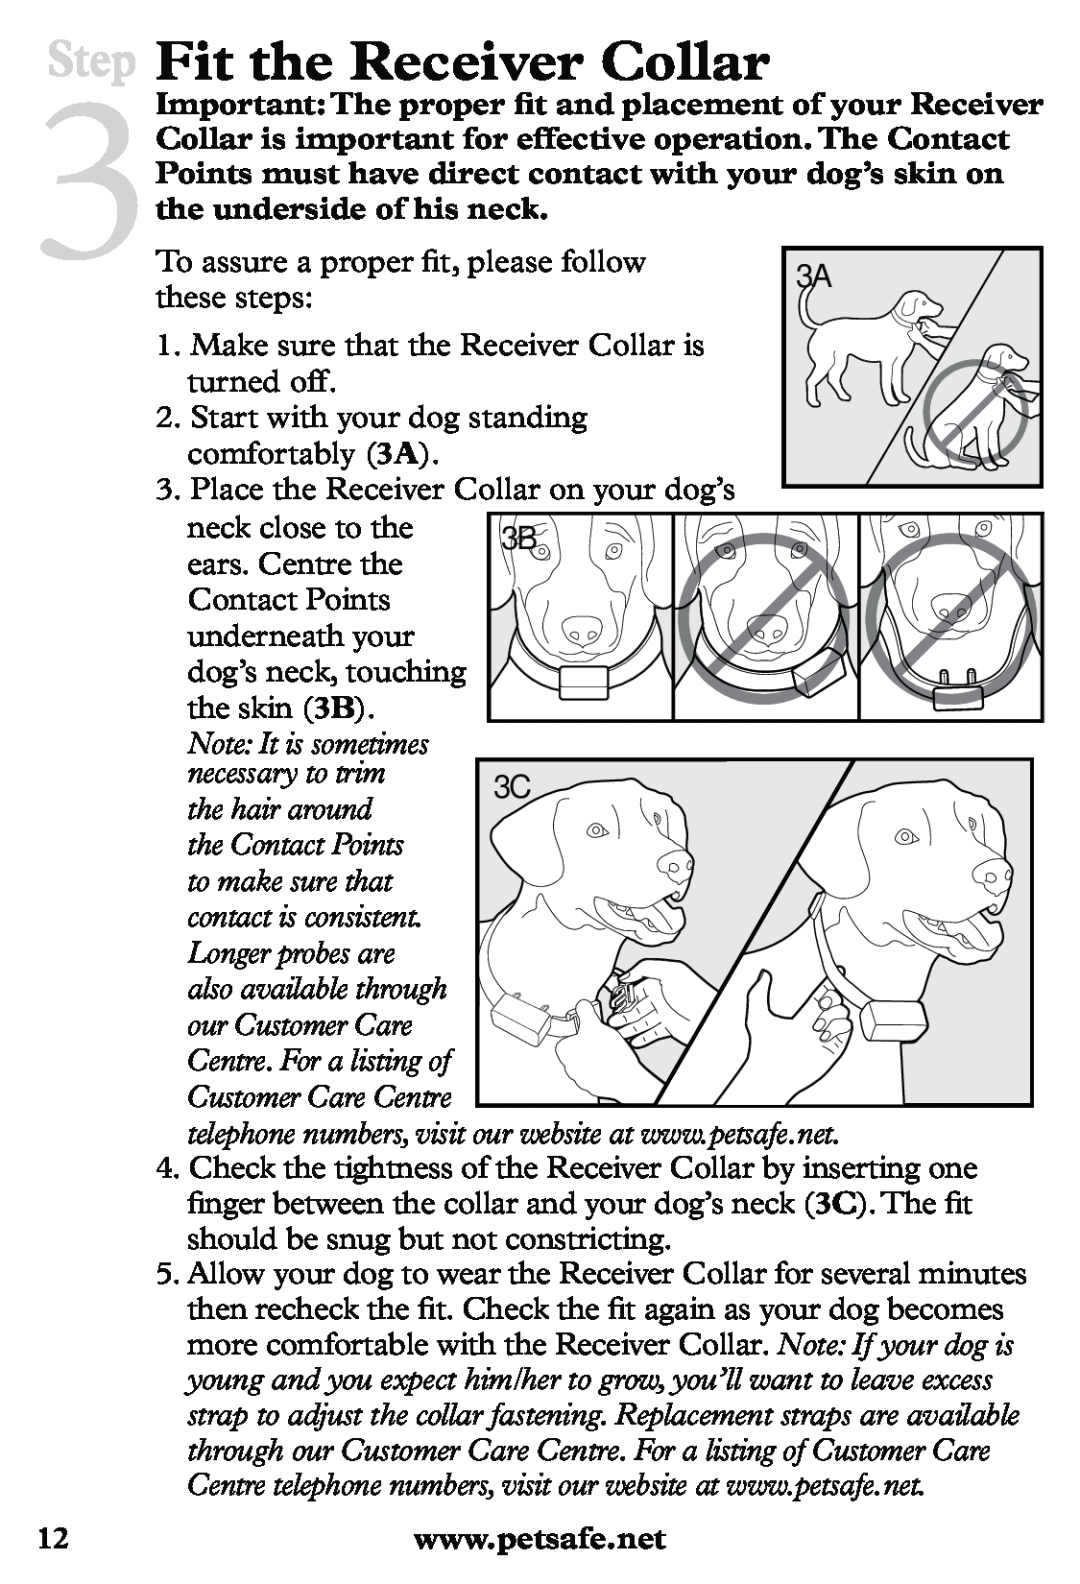 Petsafe PDT20-11939 Step Fit the Receiver Collar, Important The proper ﬁt and placement of your Receiver 